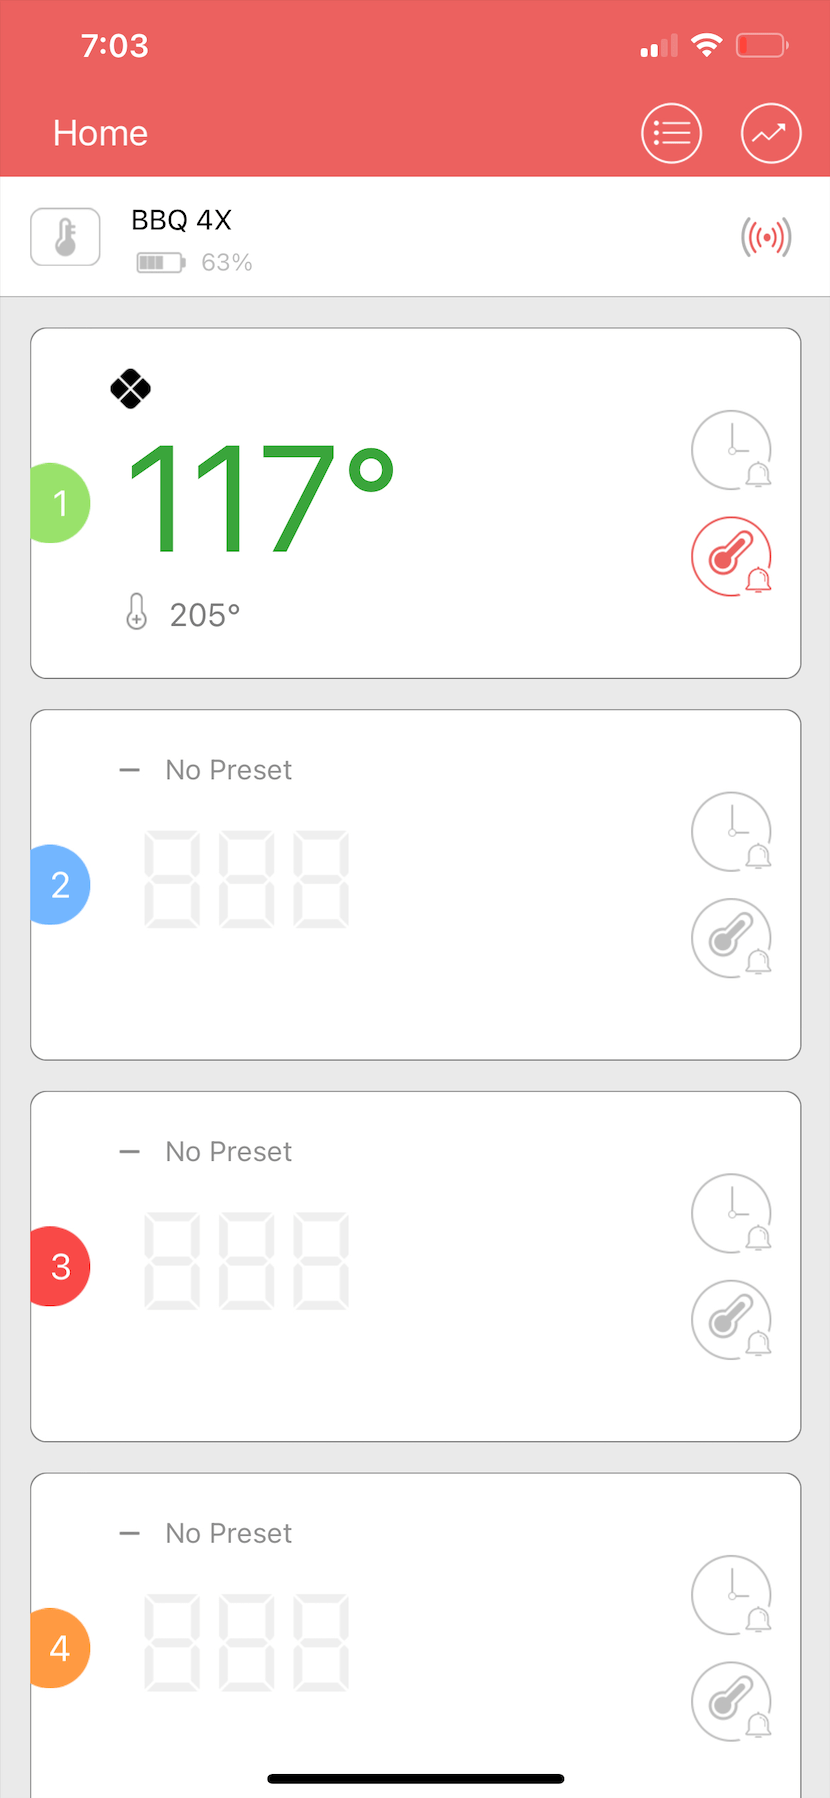 The BBQ Go app allows you to track multiple probes.